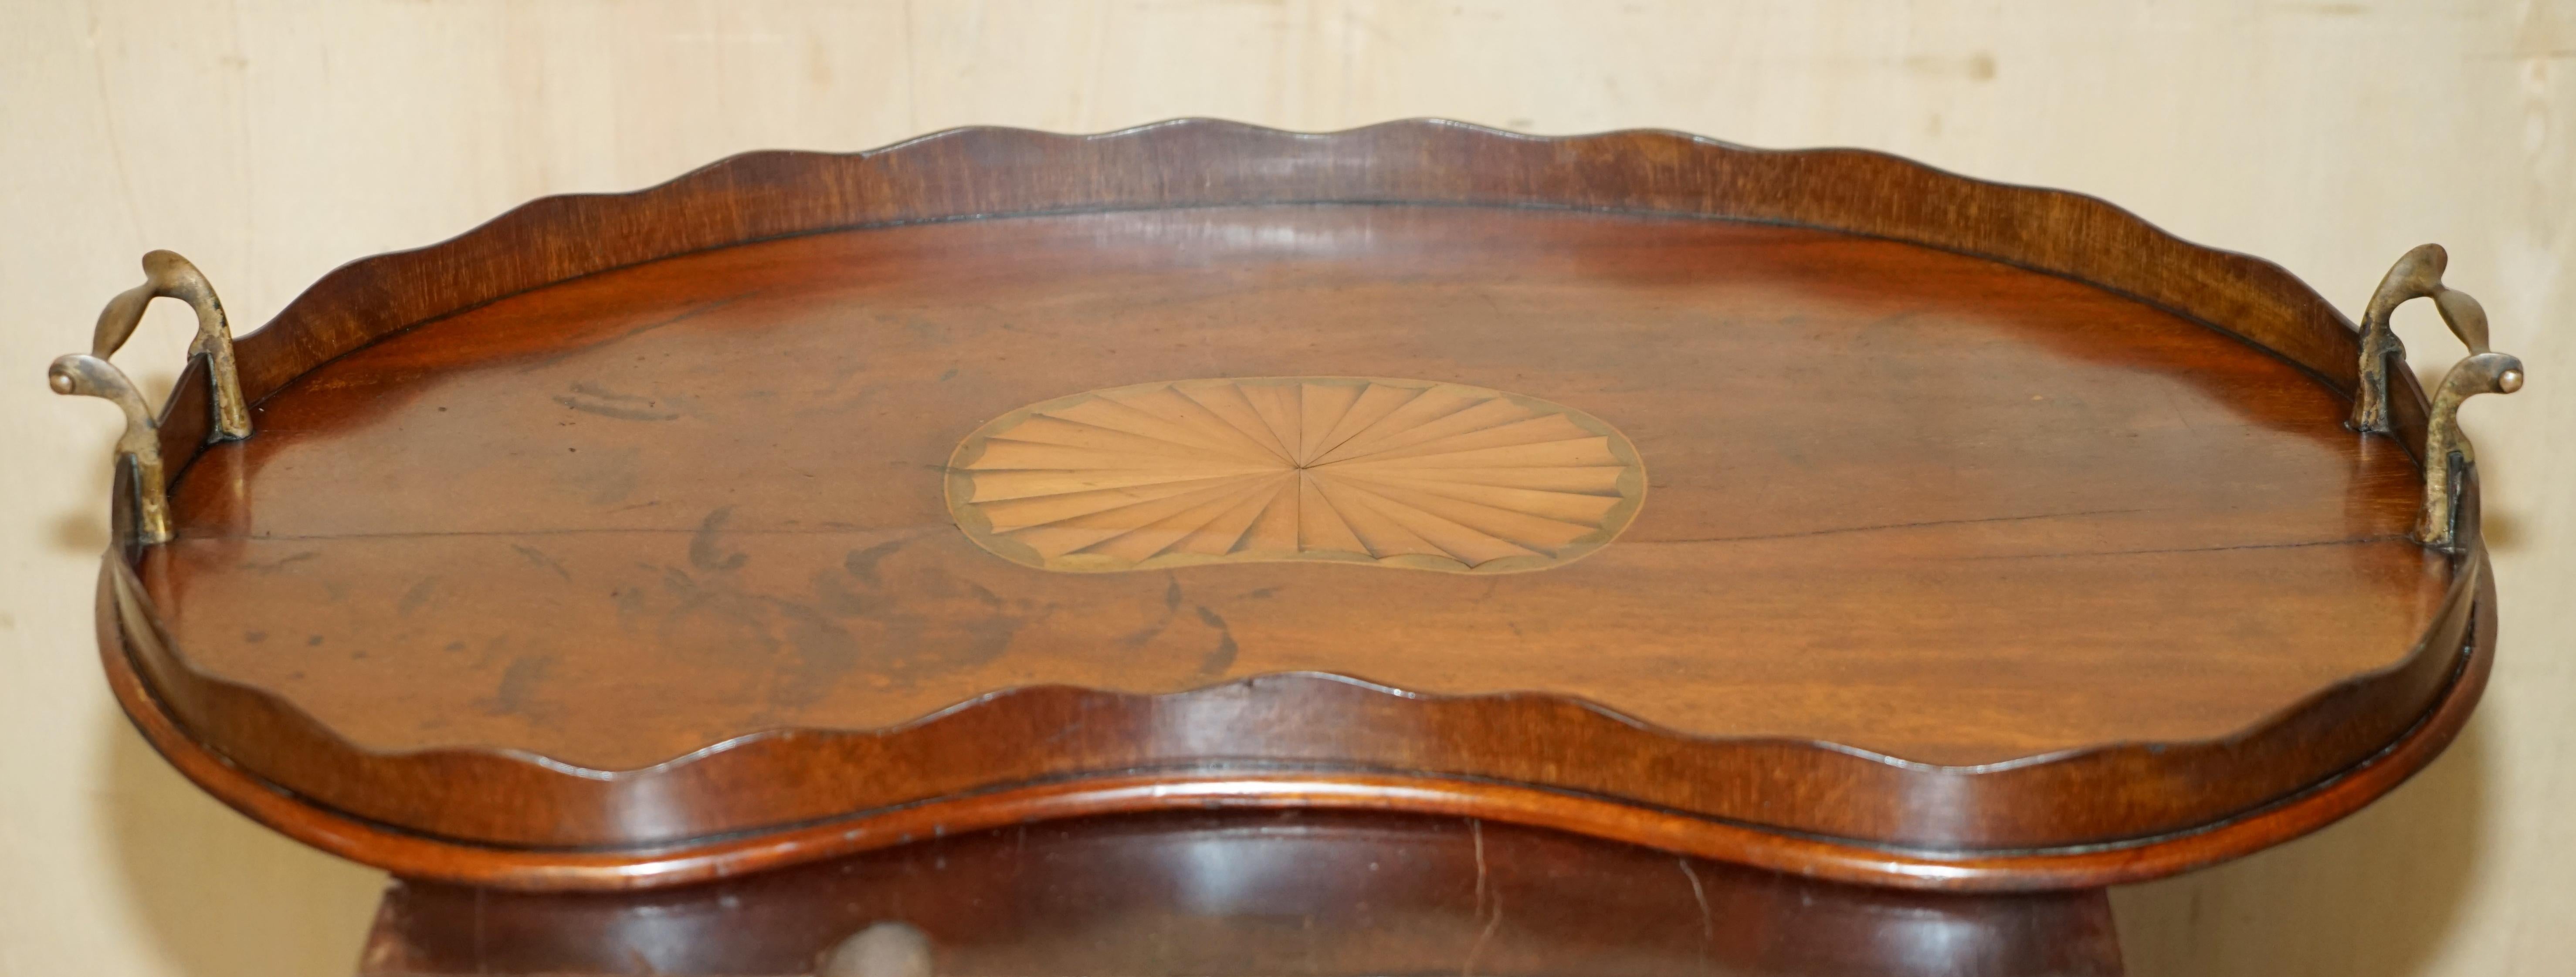 High Victorian ANTIQUE CiRCA 1880 SHERATON REVIVAL SATINWOOD WALNUT SERVING TRAY BRONZE HANDLEs For Sale